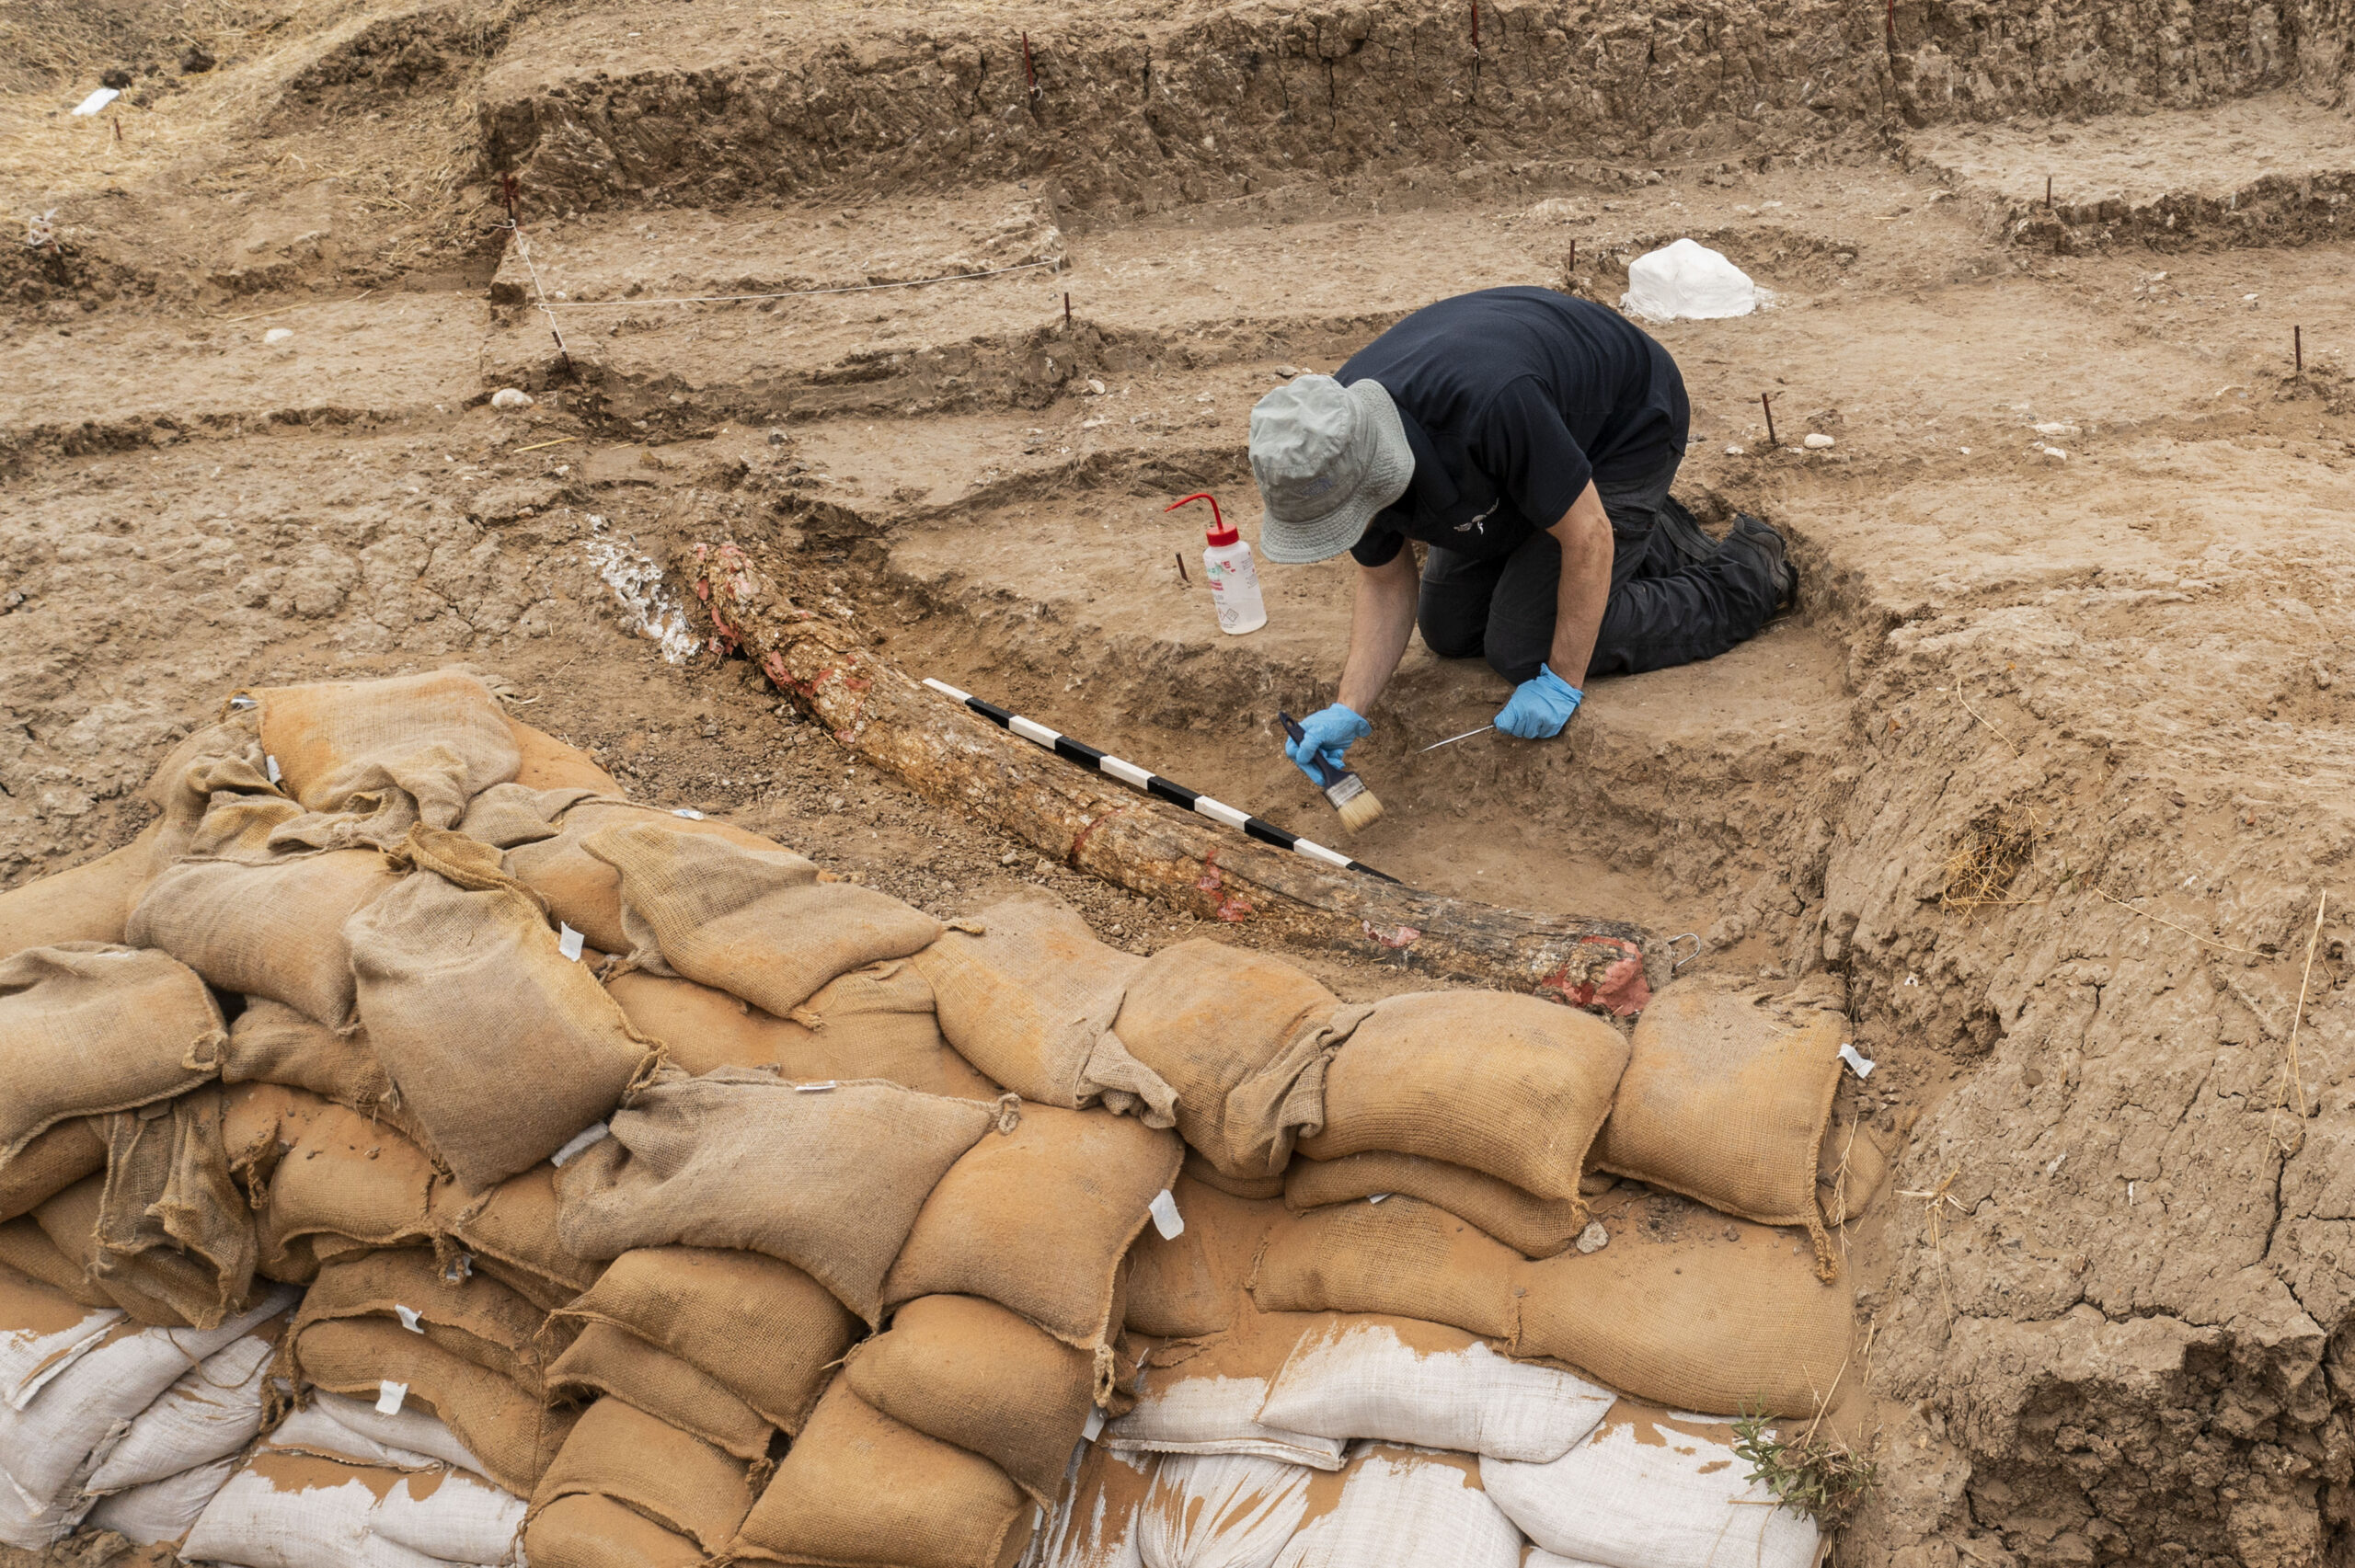 An Israeli archaeologist works next to the recently discovered 2.5-meter-long tusk of an estimated 500,000-year-old straight-tusked elephant, near the city of Gedera, Israel, Wednesday, Aug. 31, 2022. Israel Antiquities Authority prehistorian Avi Levy, who headed the dig, said it was "the largest complete fossil tusk ever found at a prehistoric site in Israel or the Near East. (AP Photo/Tsafrir Abayov)